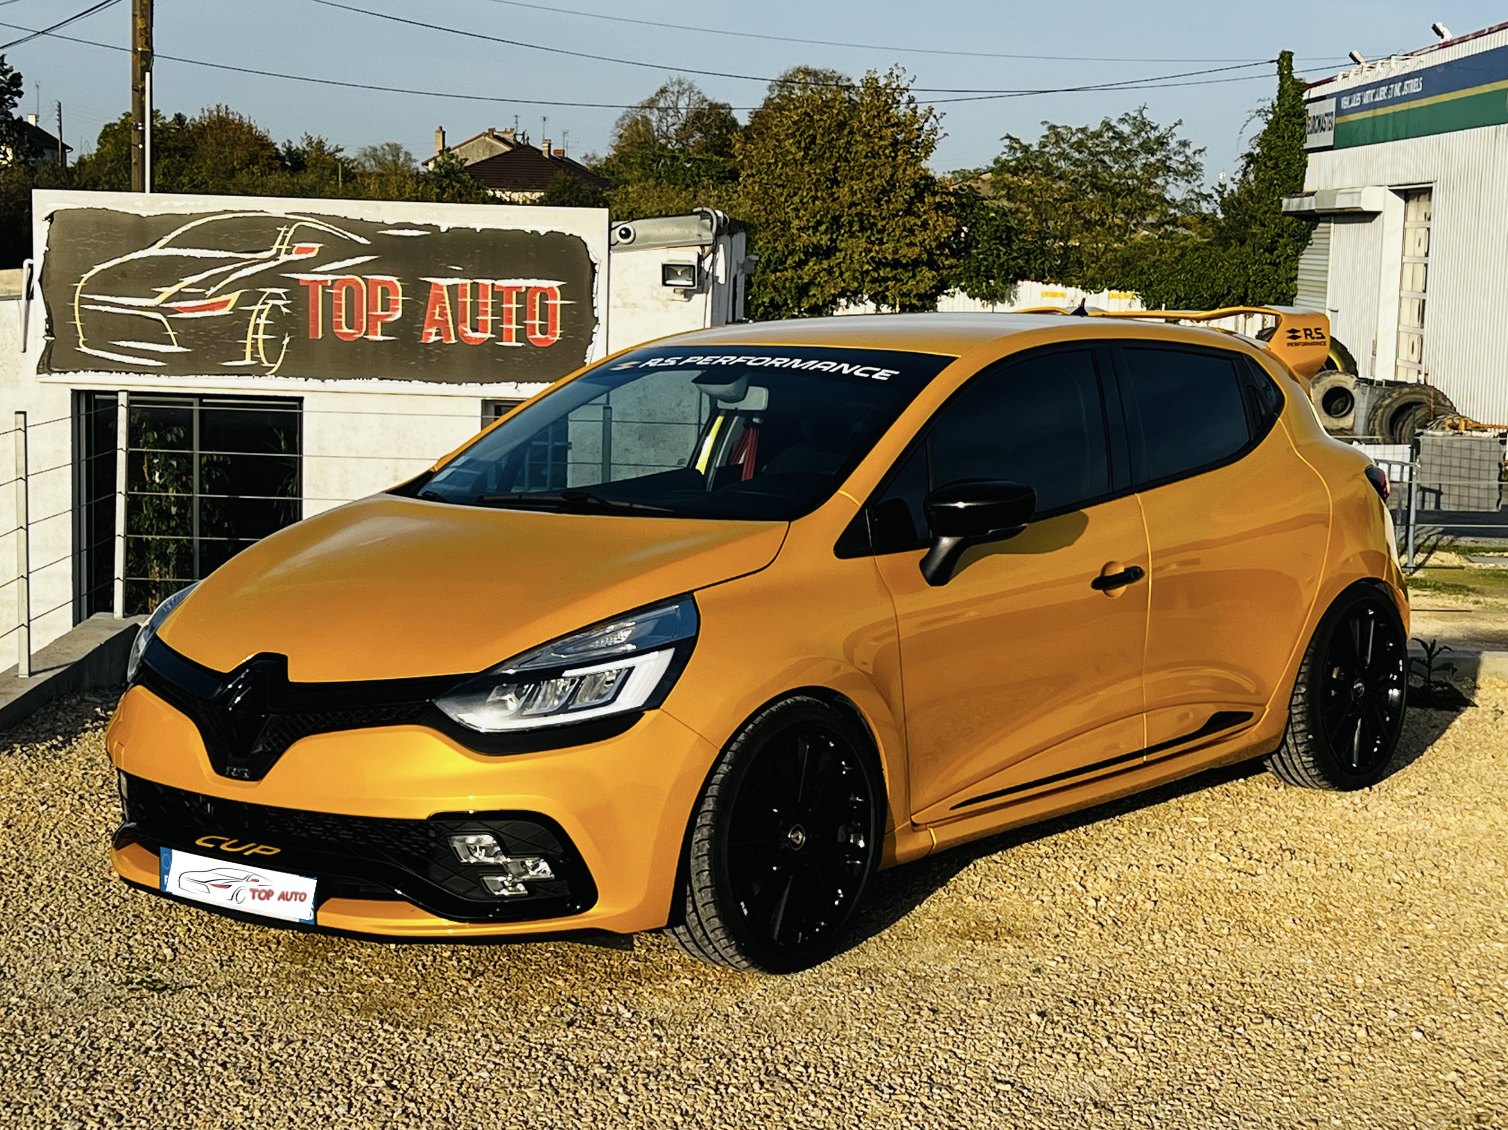 RENAULT Clio 4 RS 1.6 TCE 200 CUP EDC - Top Auto 86